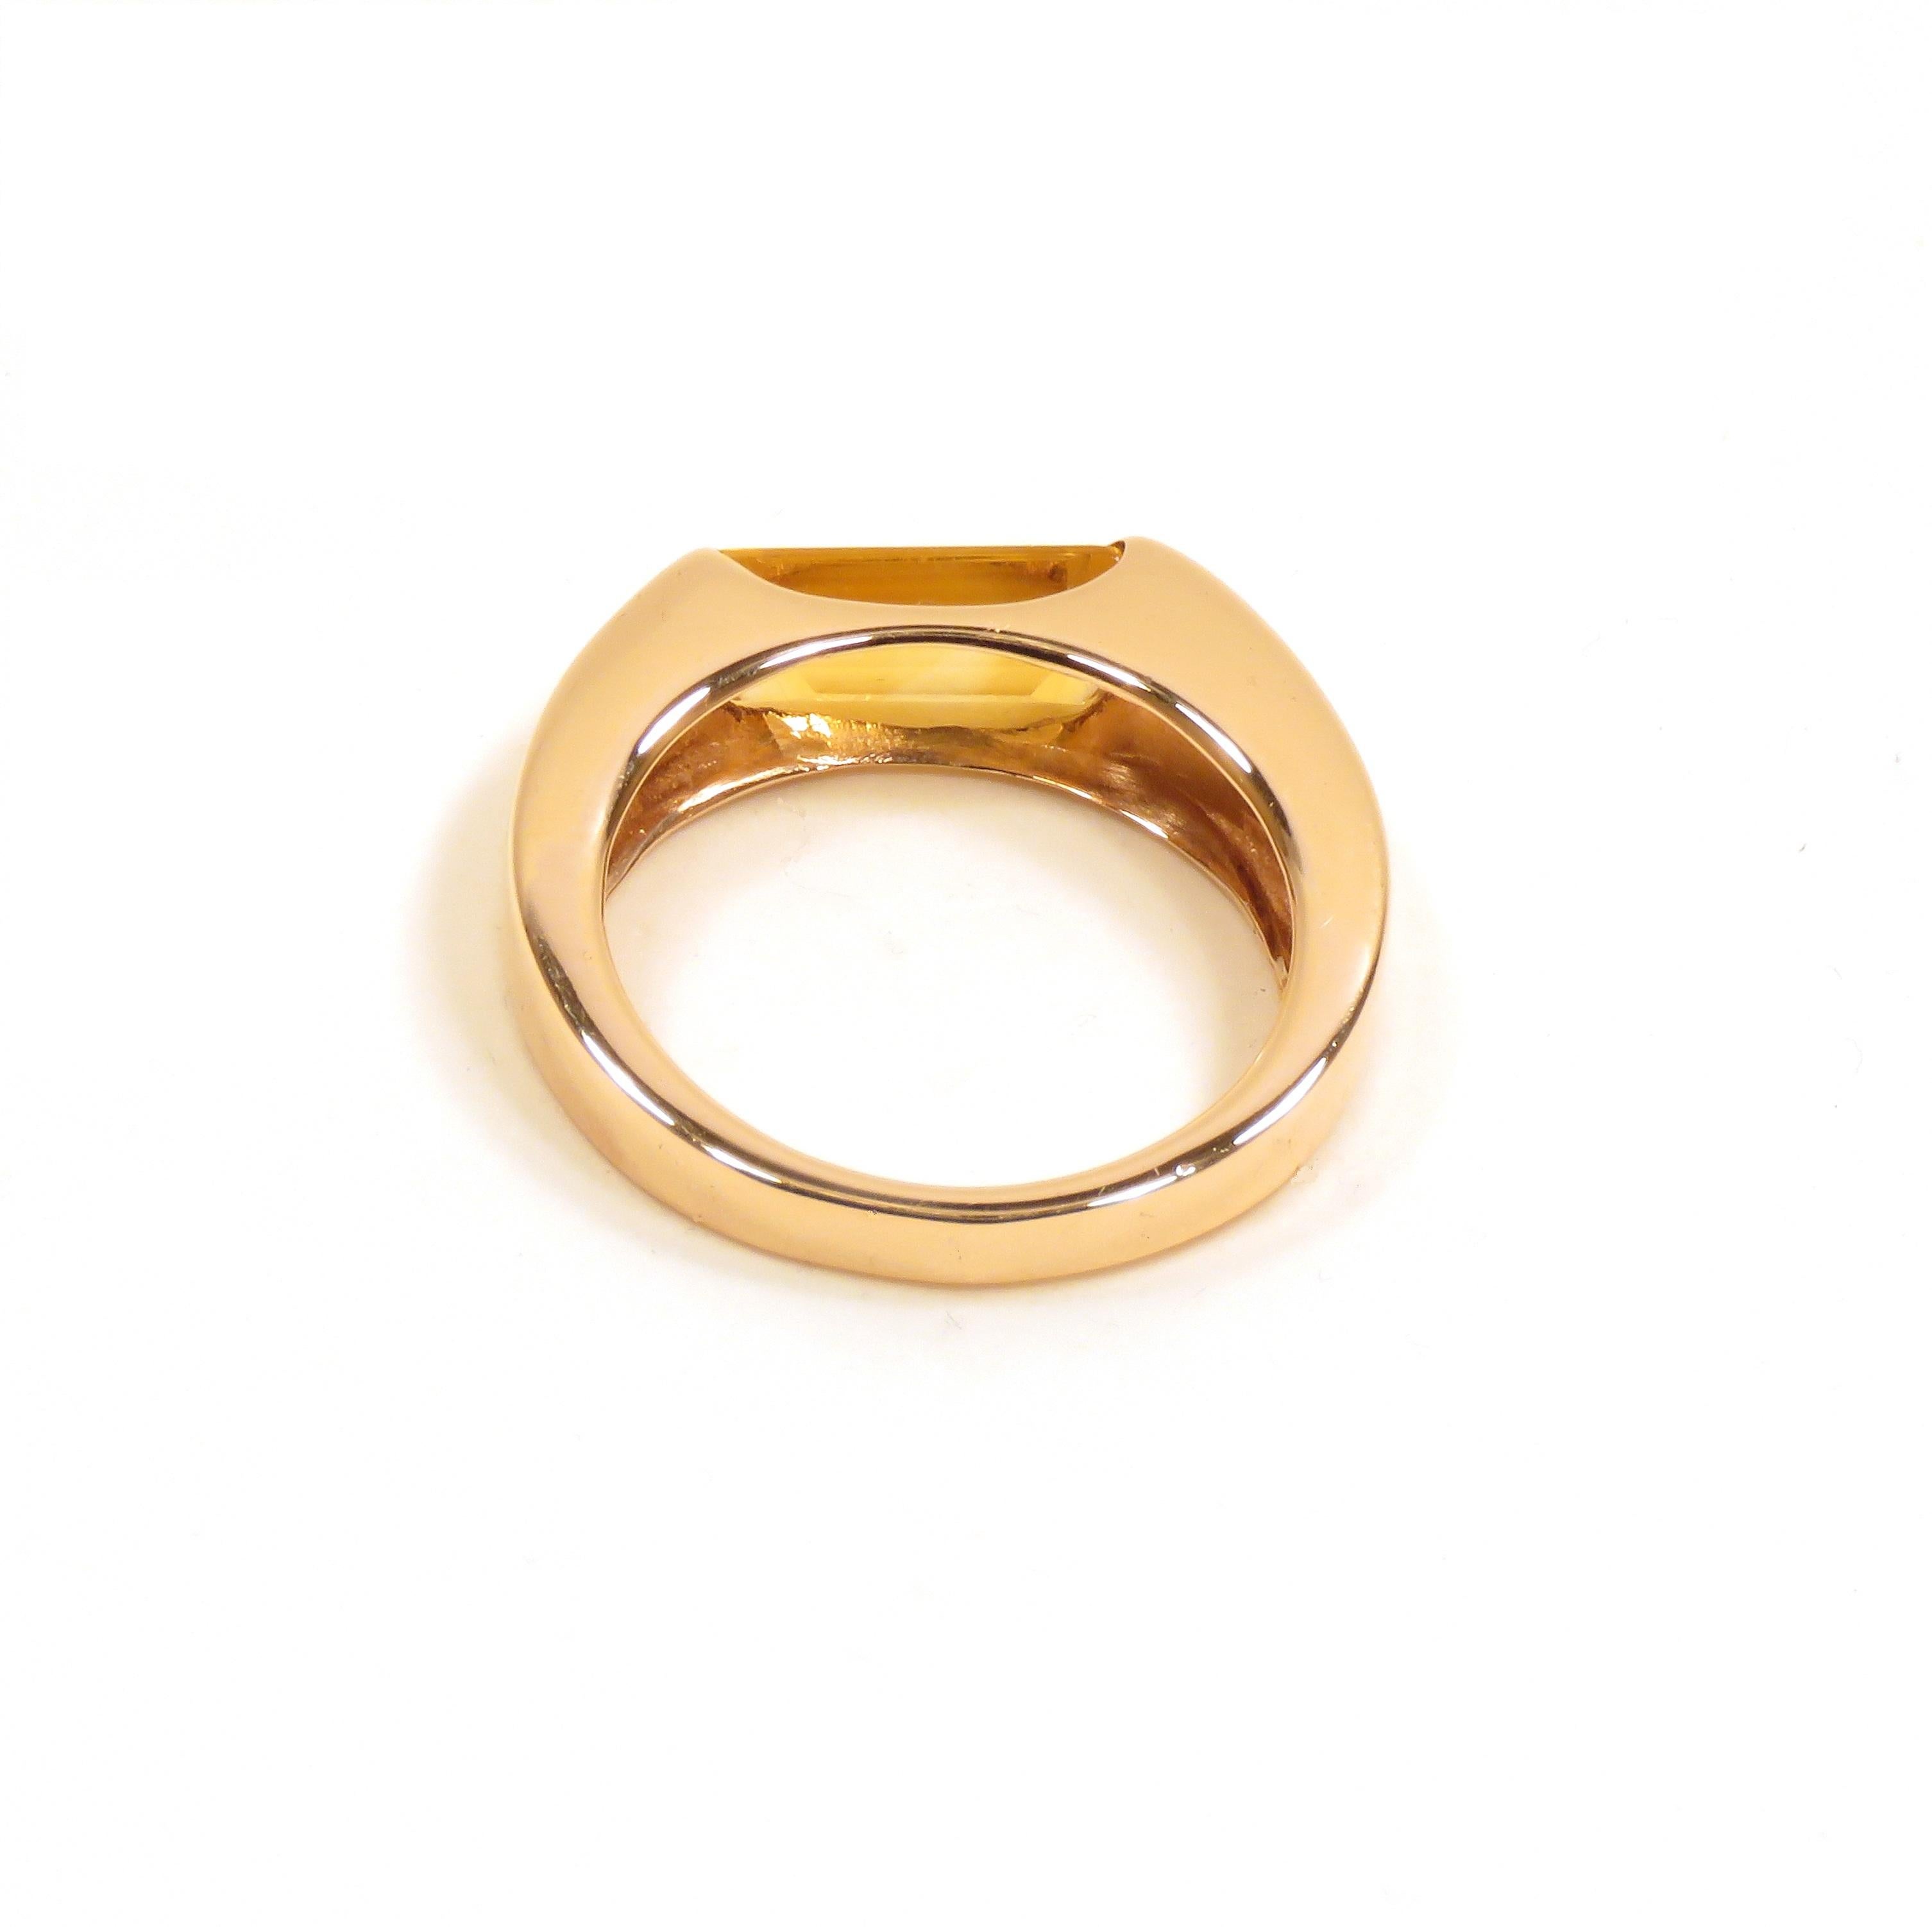 Women's Topaz Rose Gold Band Ring Handcrafted in Italy by Botta Gioielli